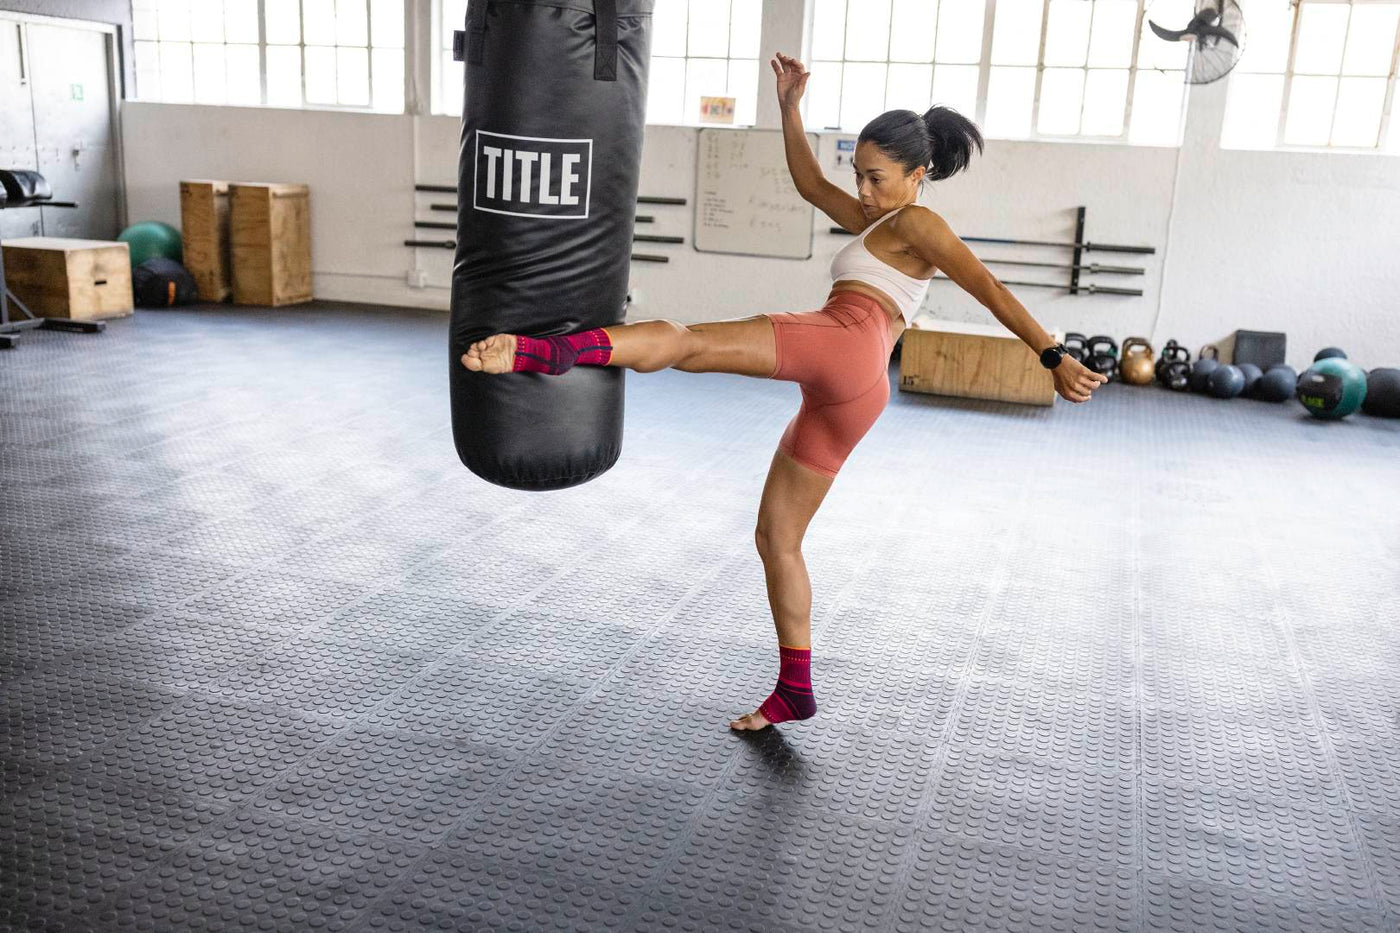 woman training for martial arts. She is kicking a punching bag while wearing a compression ankle brace